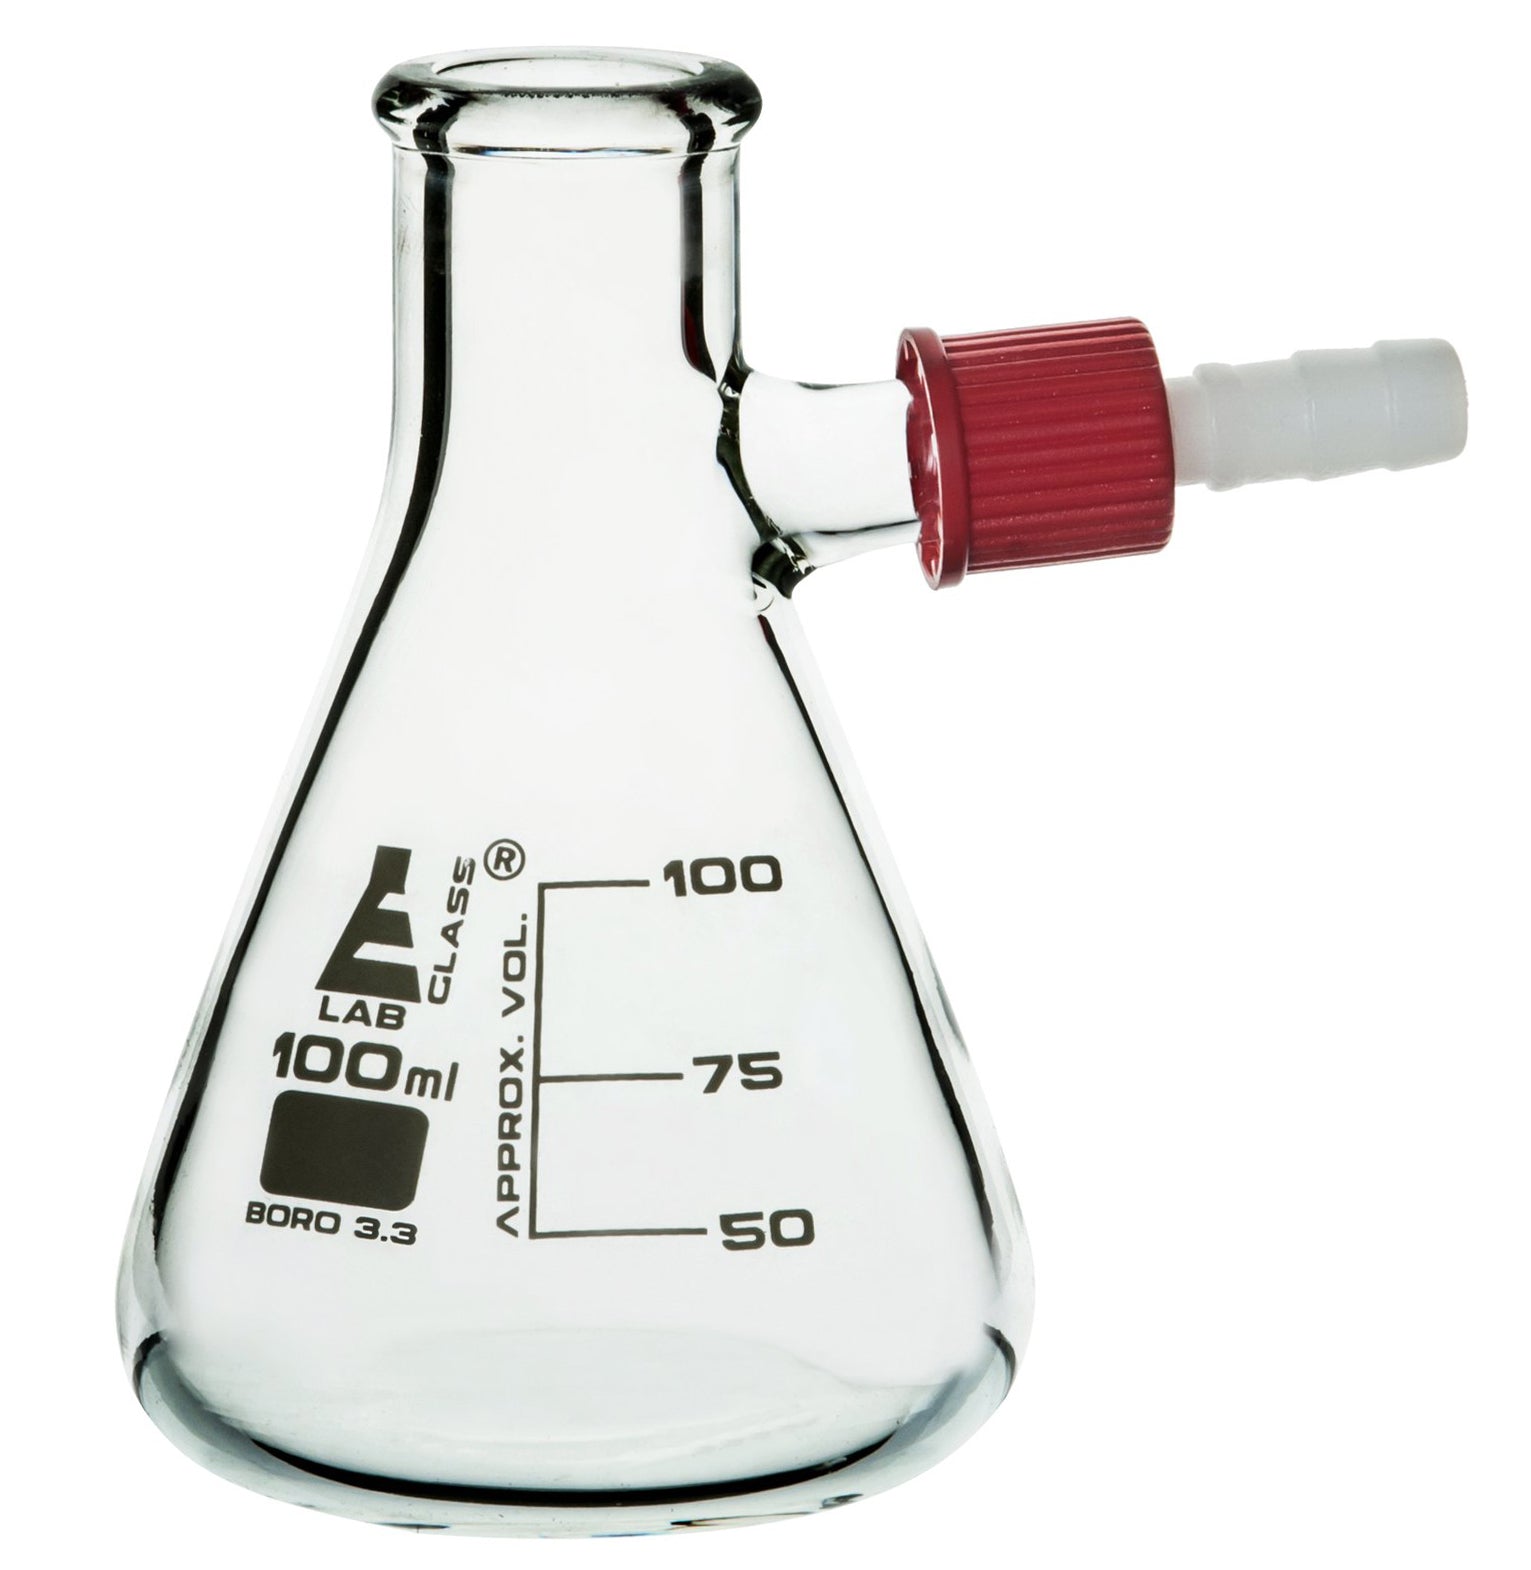 Borosilicate Glass Filtering Flask With Plastic Connector, 100ml, Graduated, Autoclavable